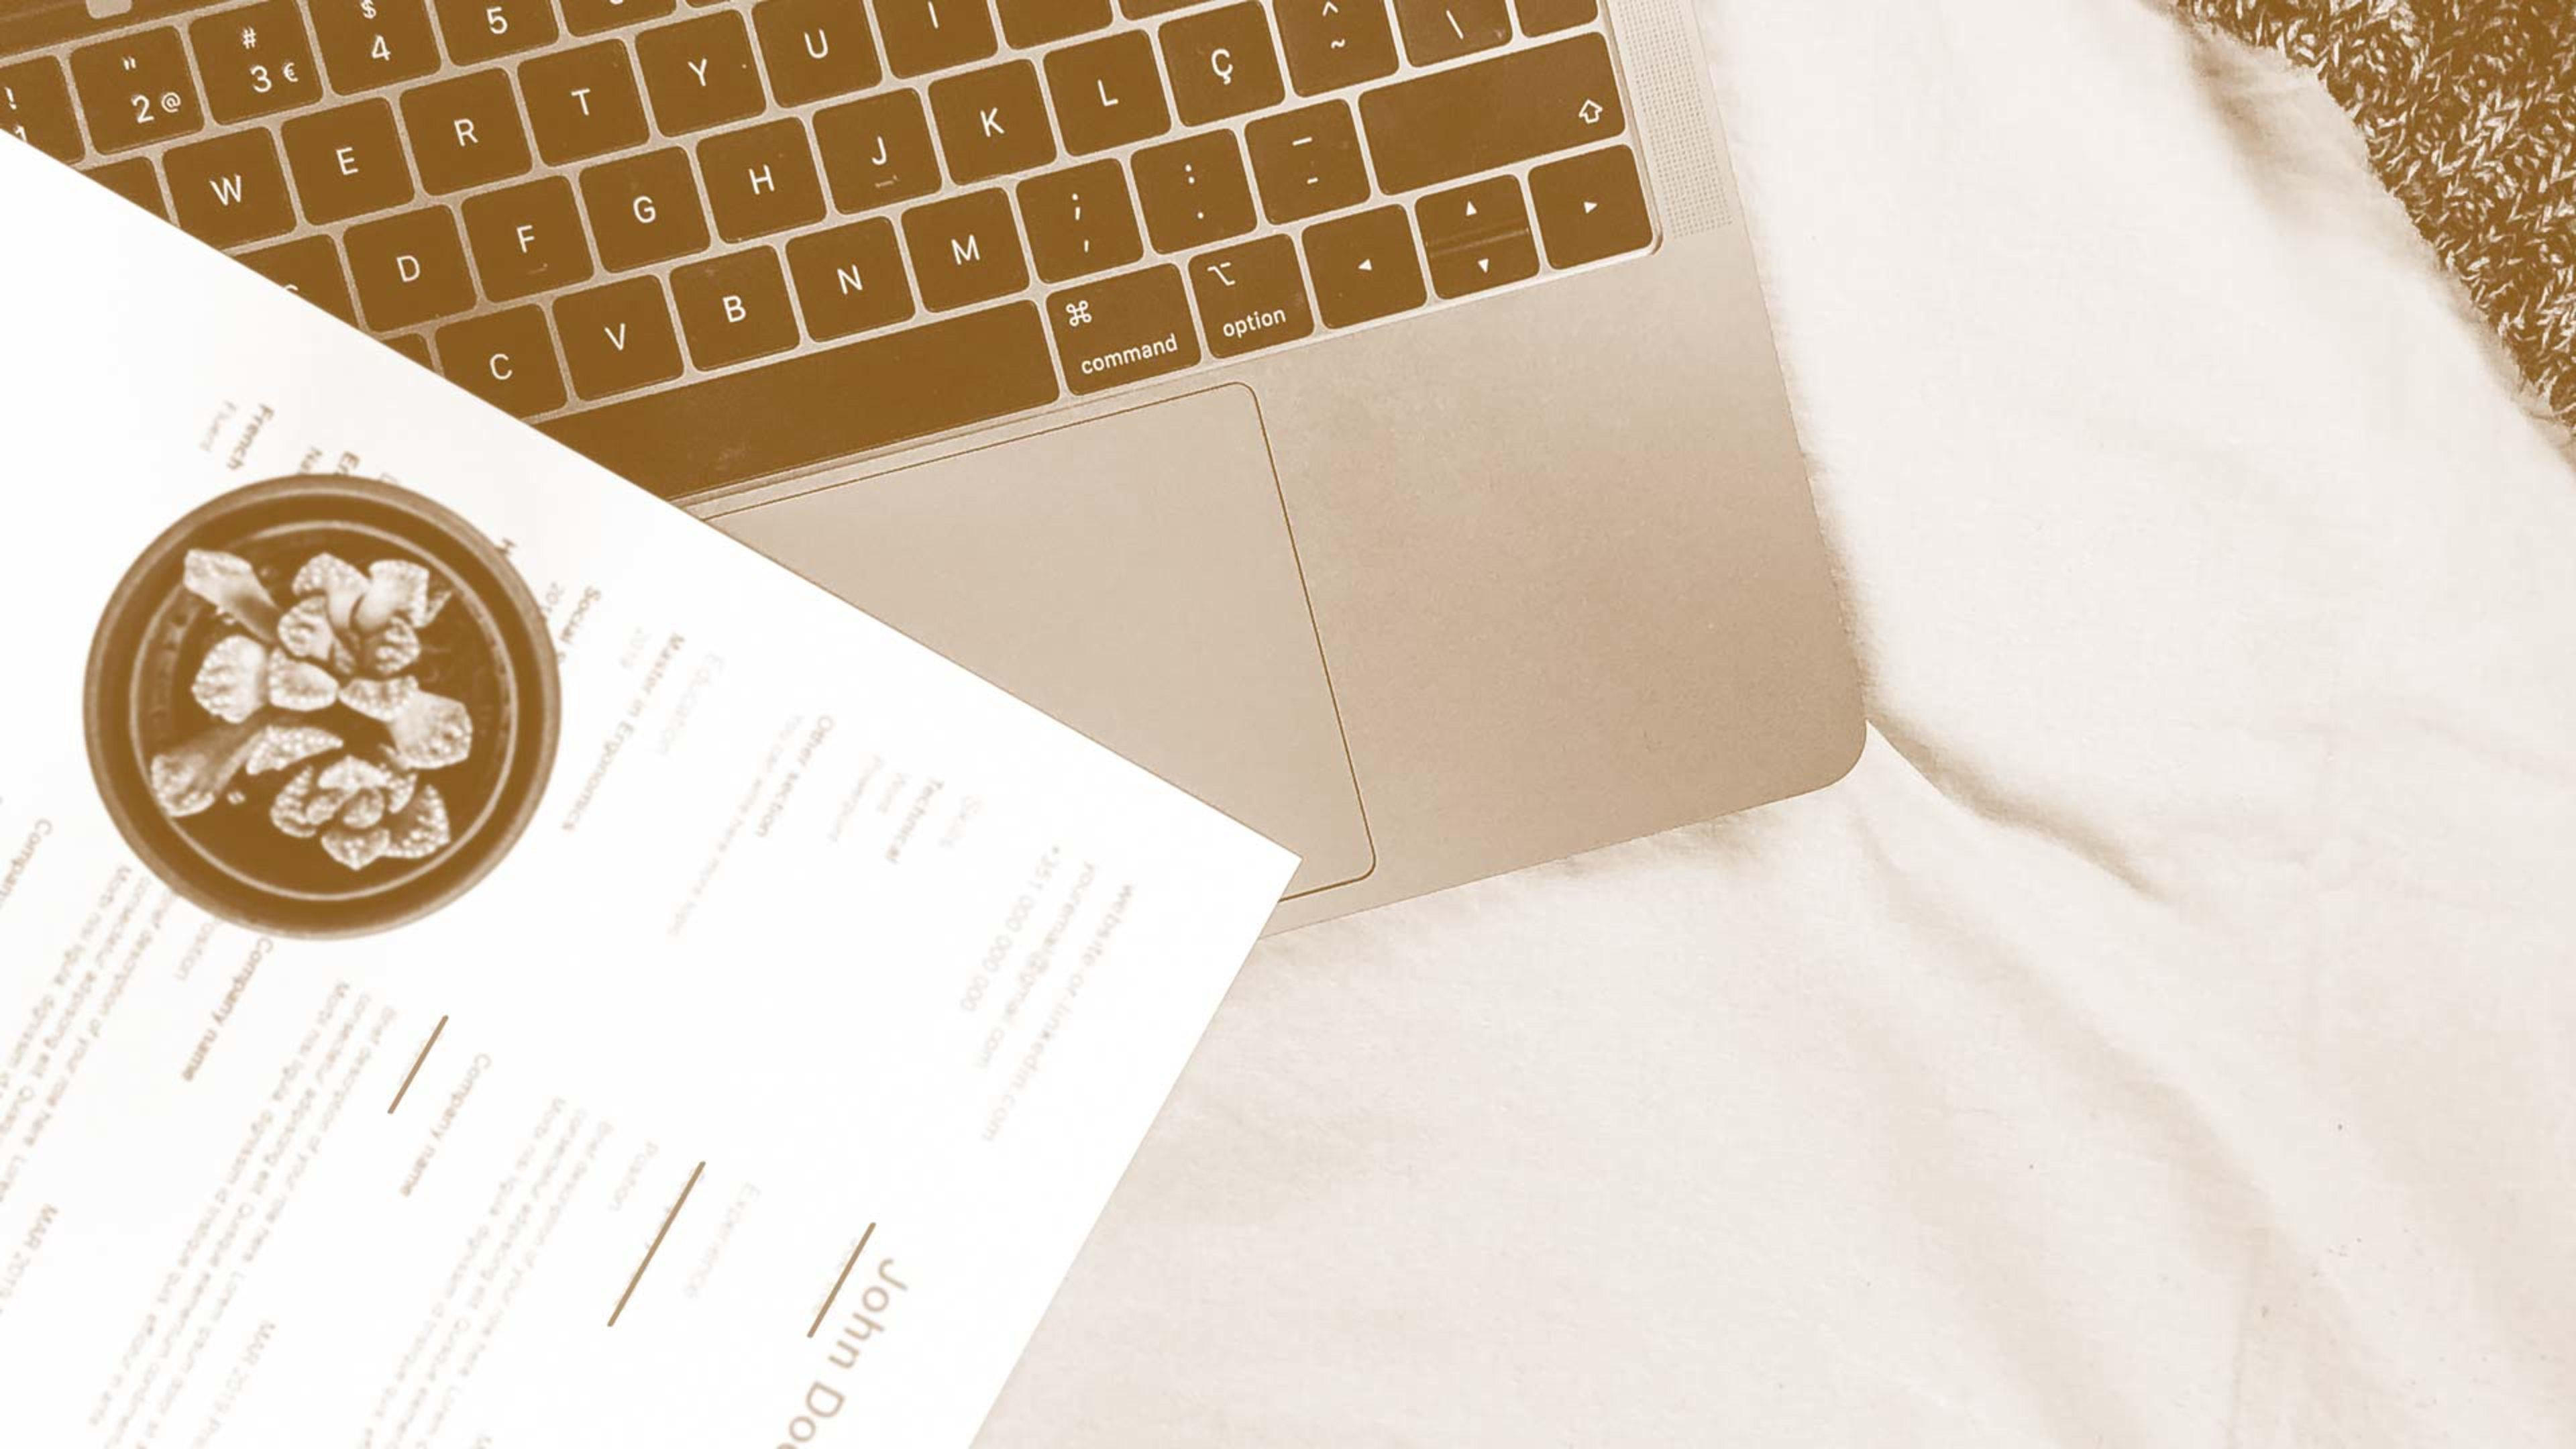 5 things you should take off your resume right now